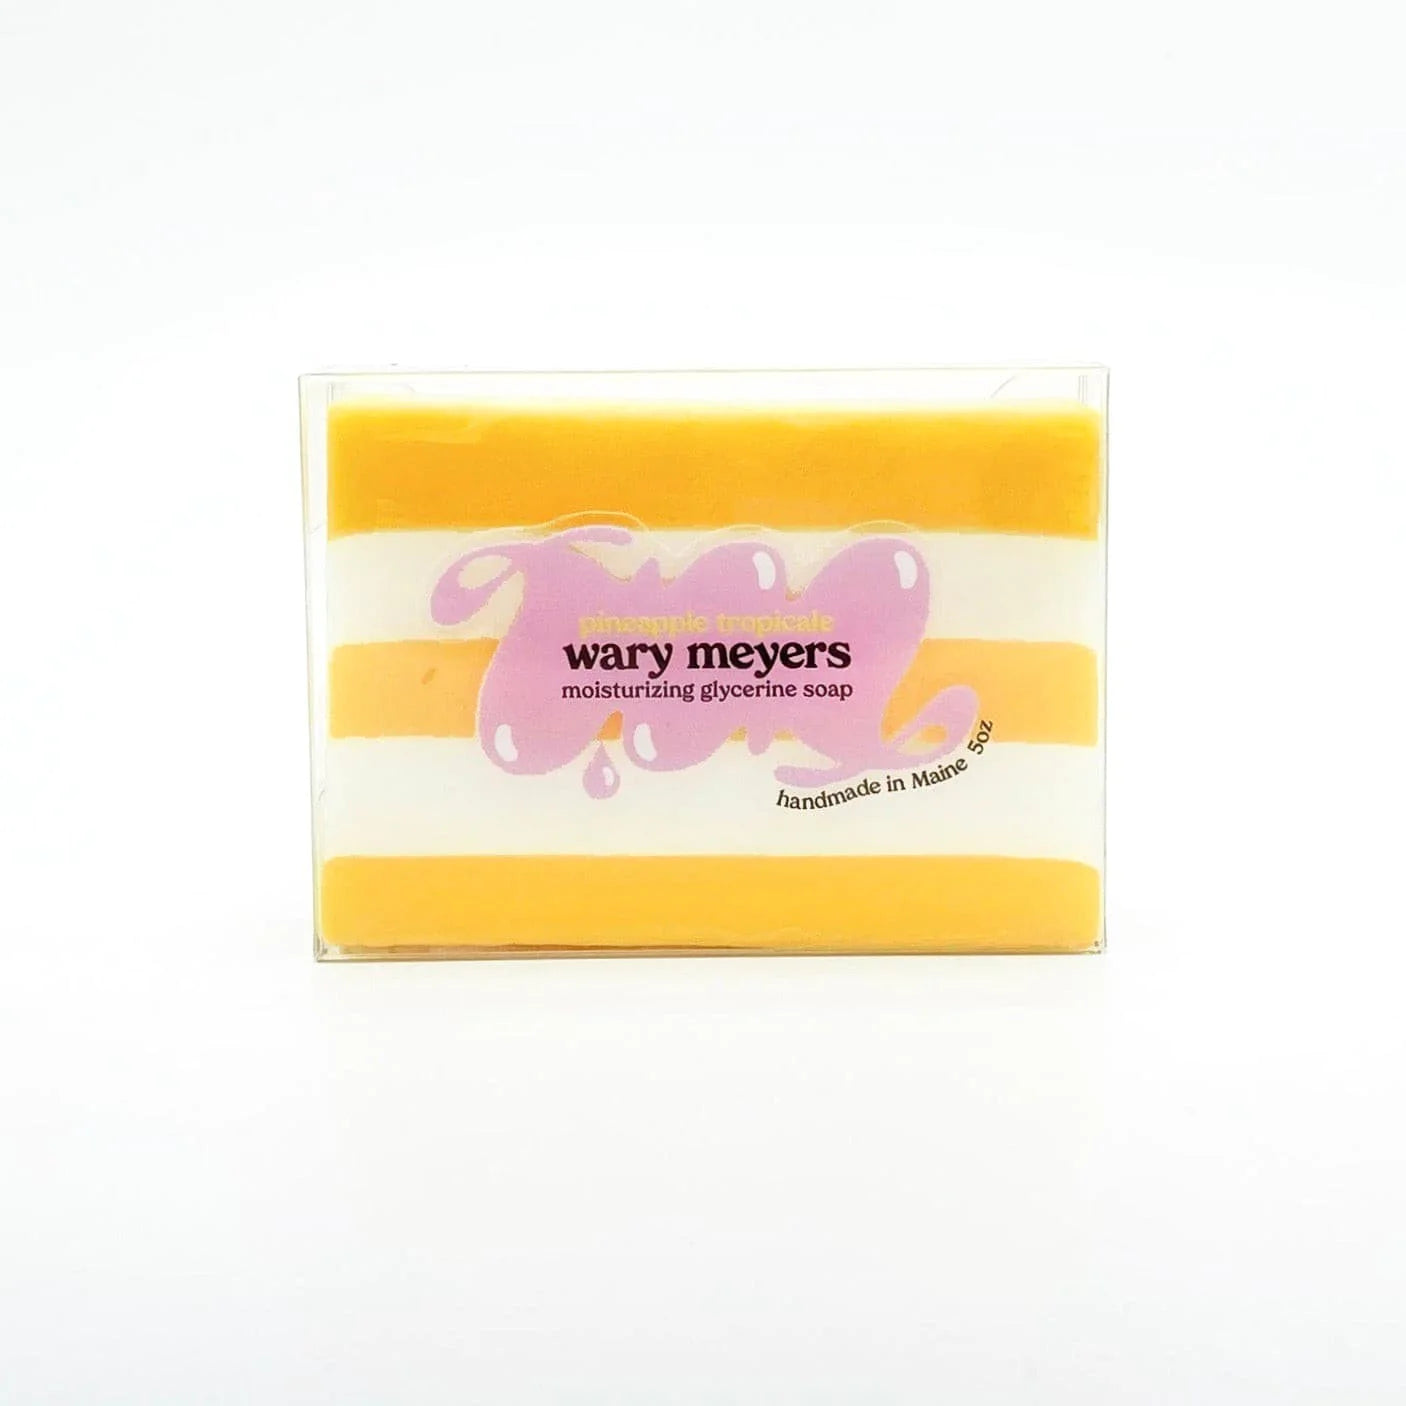 A bar of Wary Meyers Moisturizing Glycerine Soap, featuring horizontal yellow and white stripes, with the brand name and logo in a purple design, stating "handmade in Scottsdale Arizona.